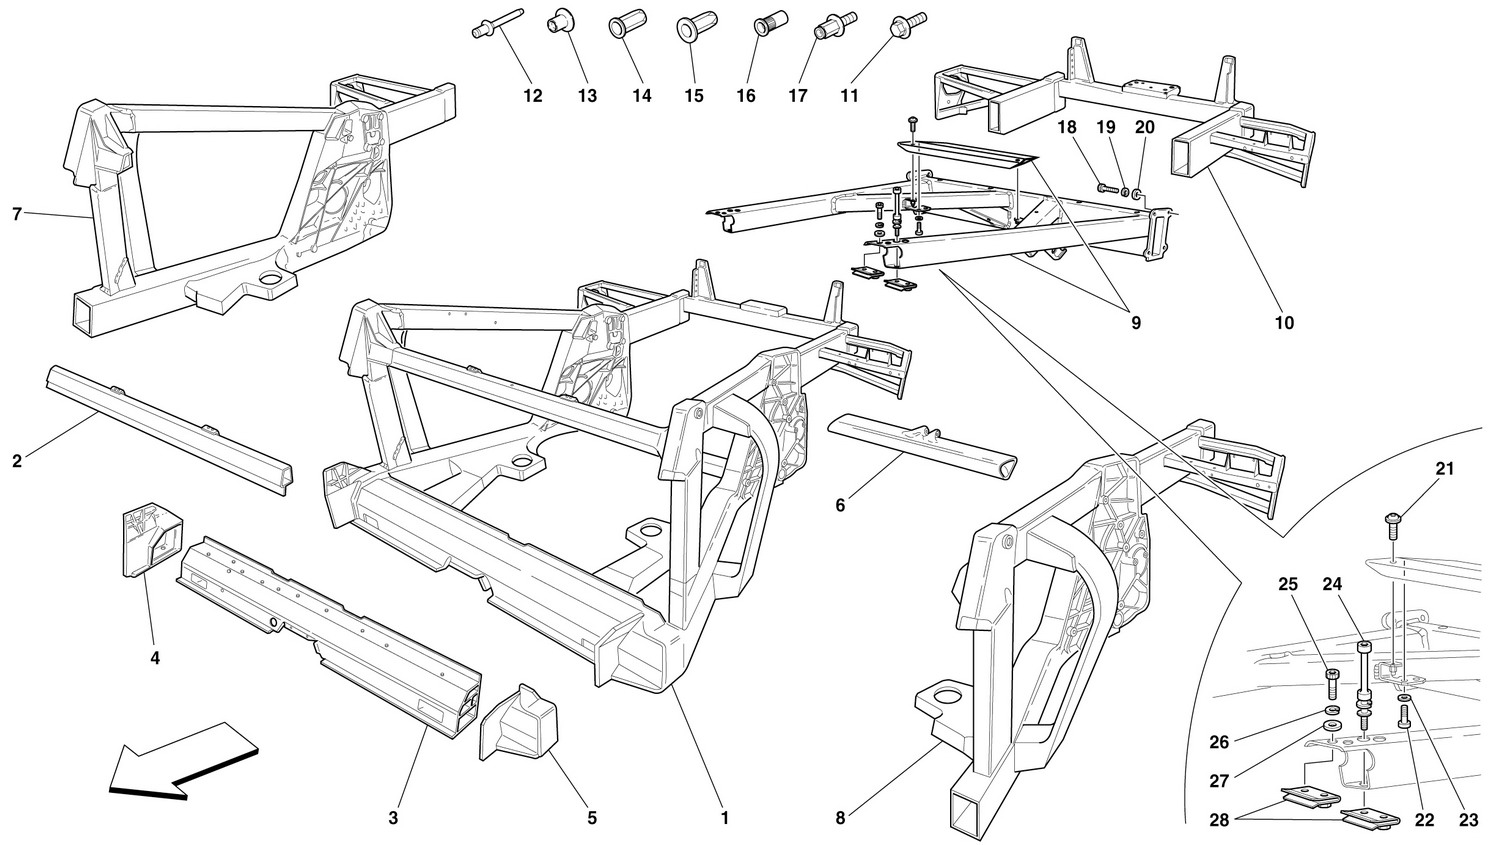 Schematic: Frame - Rear Elements Structures And Plates